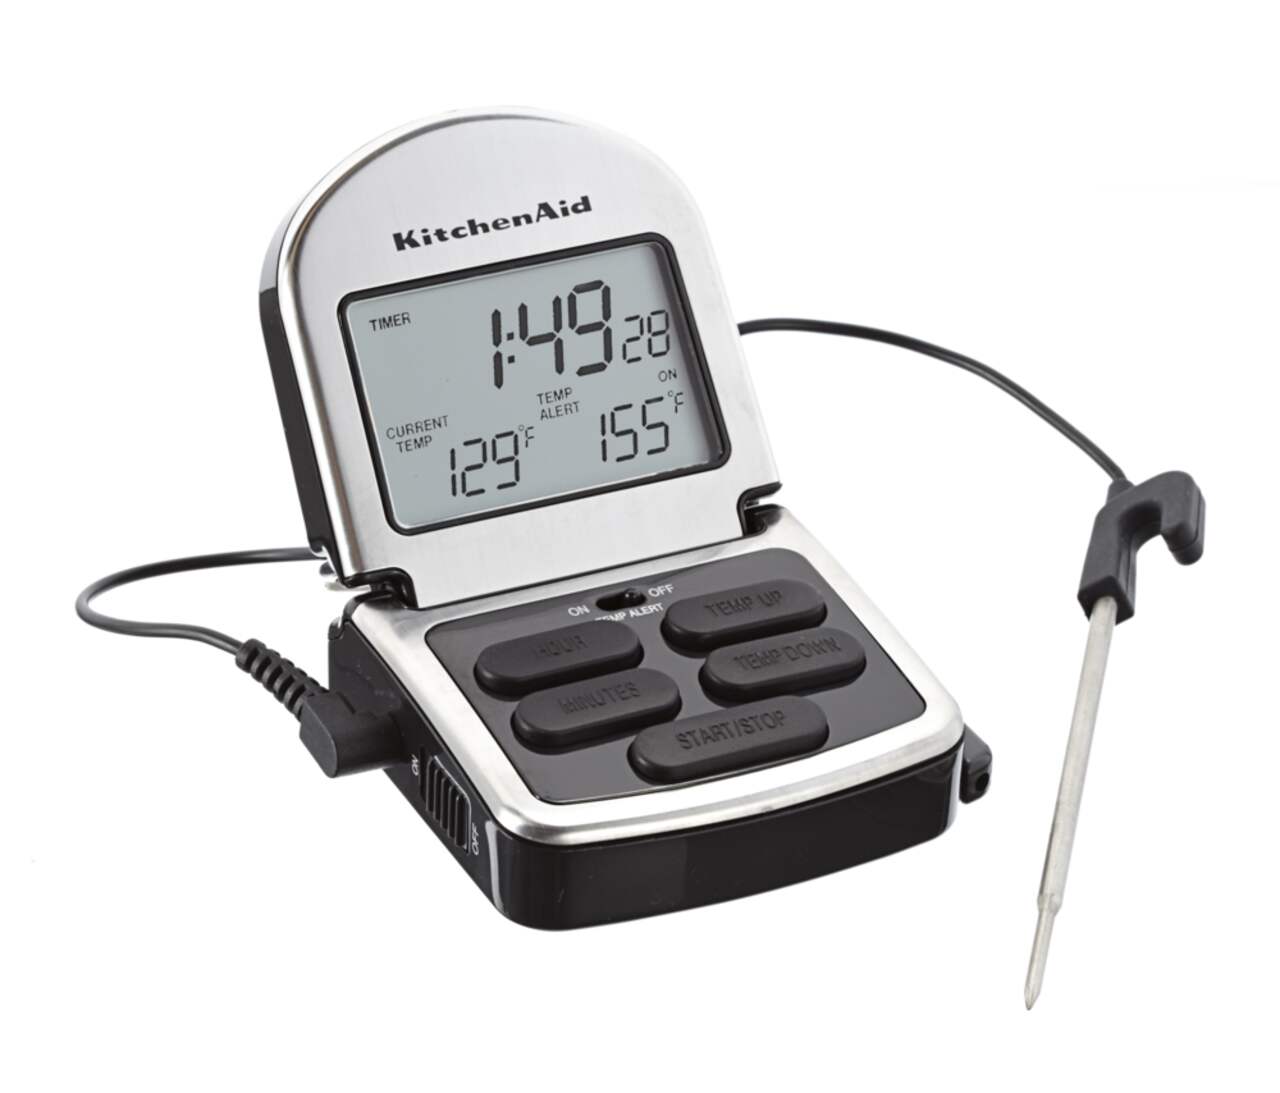 https://media-www.canadiantire.ca/product/living/kitchen/kitchen-tools-thermometers/1425469/kitchenaid-digital-probe-thermometer-4c4dfbfb-f758-4116-adc9-f2c7688c9d97.png?imdensity=1&imwidth=640&impolicy=mZoom